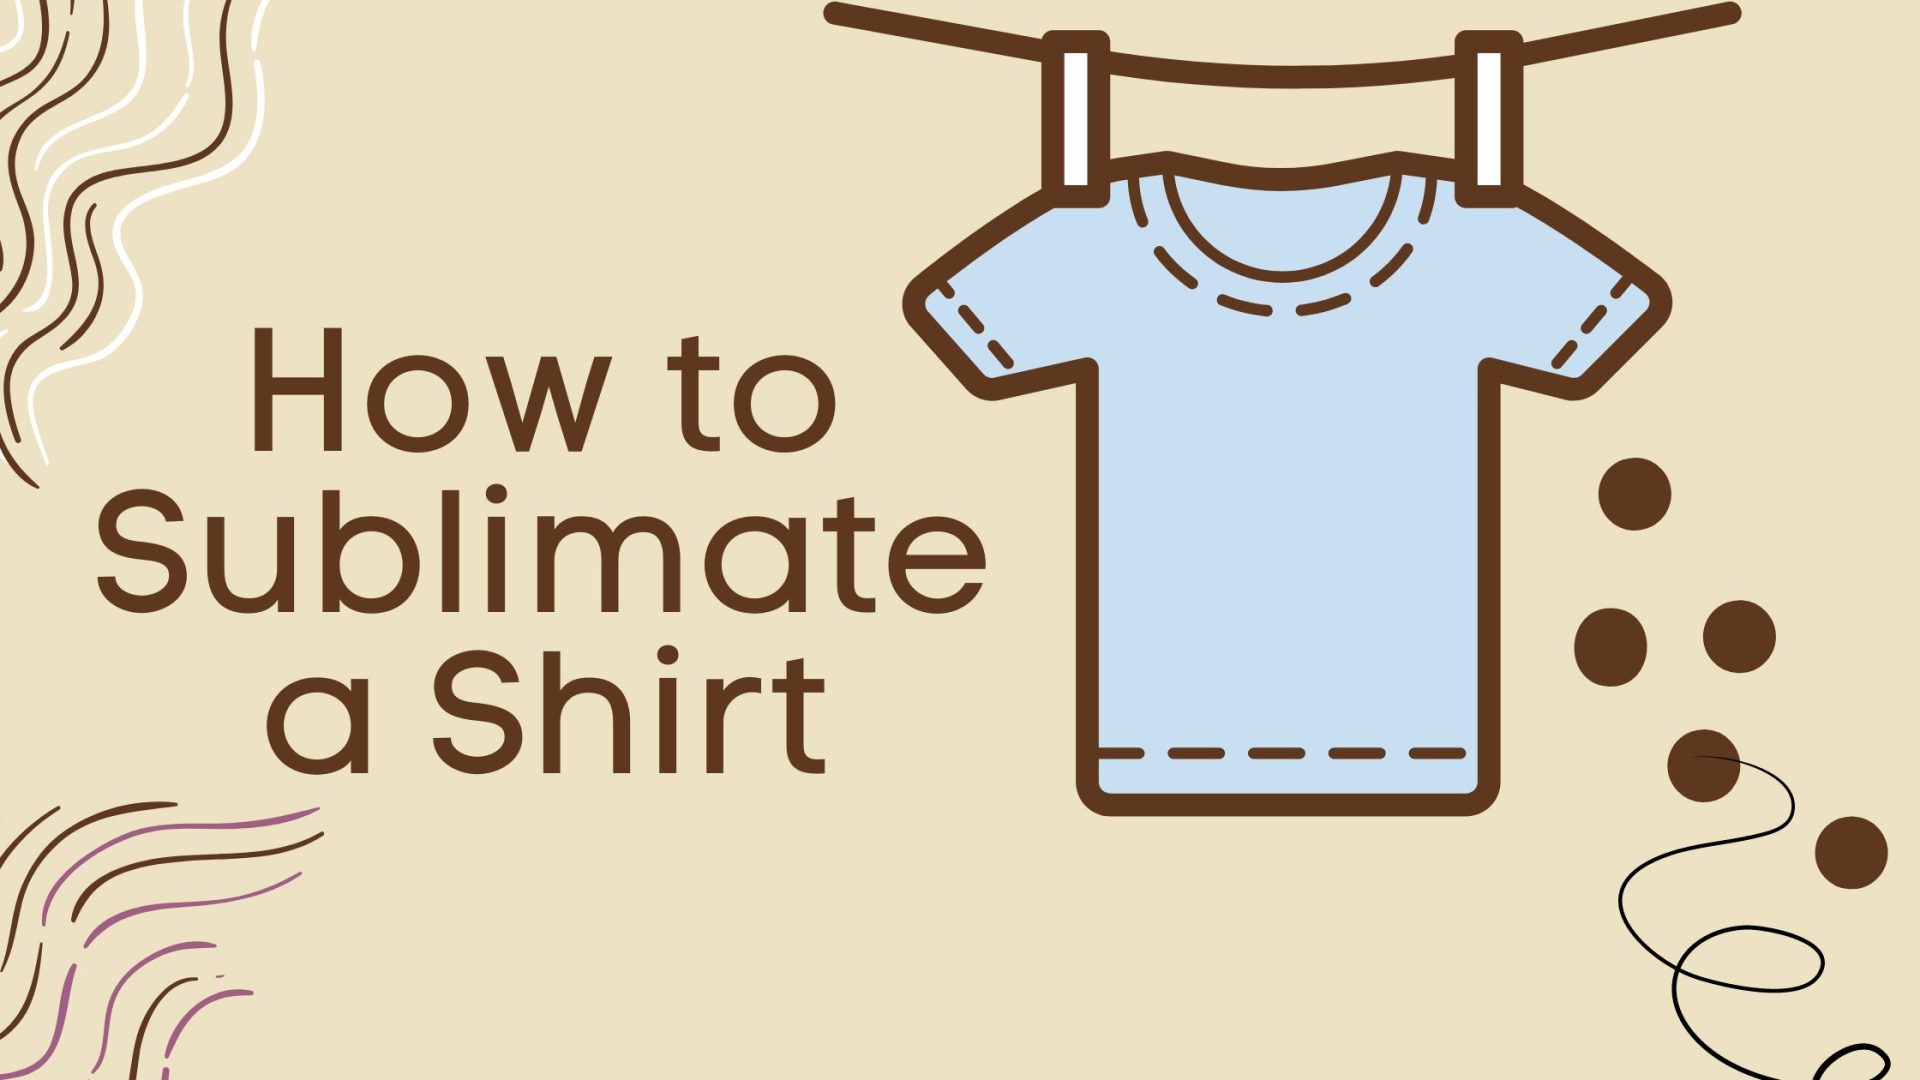 How to Sublimate a Shirt